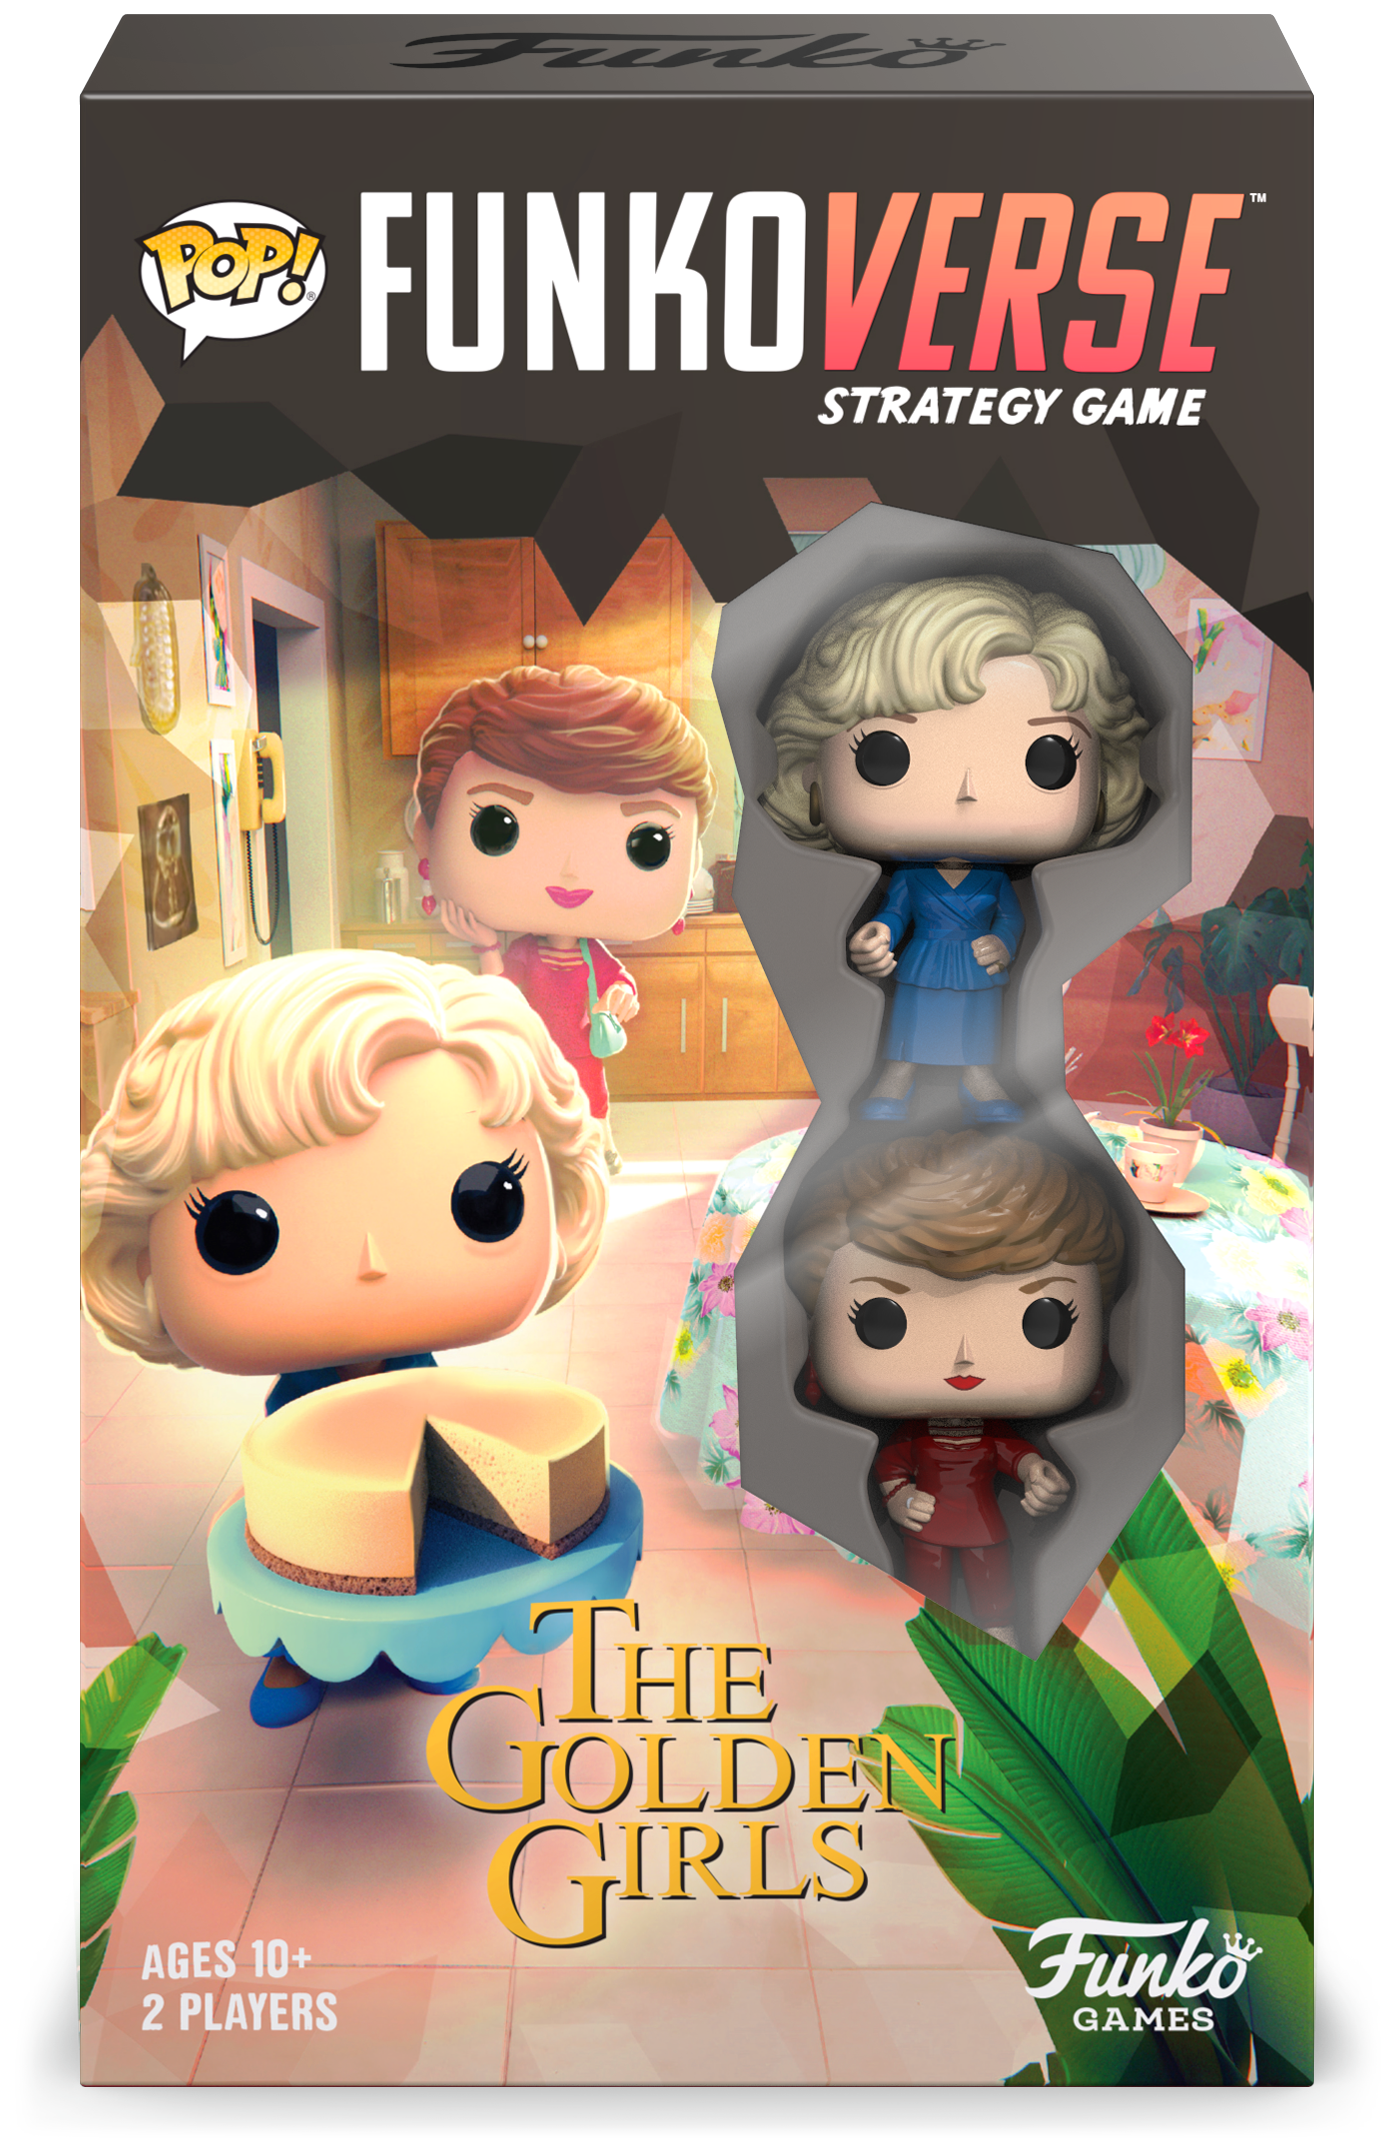 Funko Verse Strategy Game The Golden Girls New Pop 